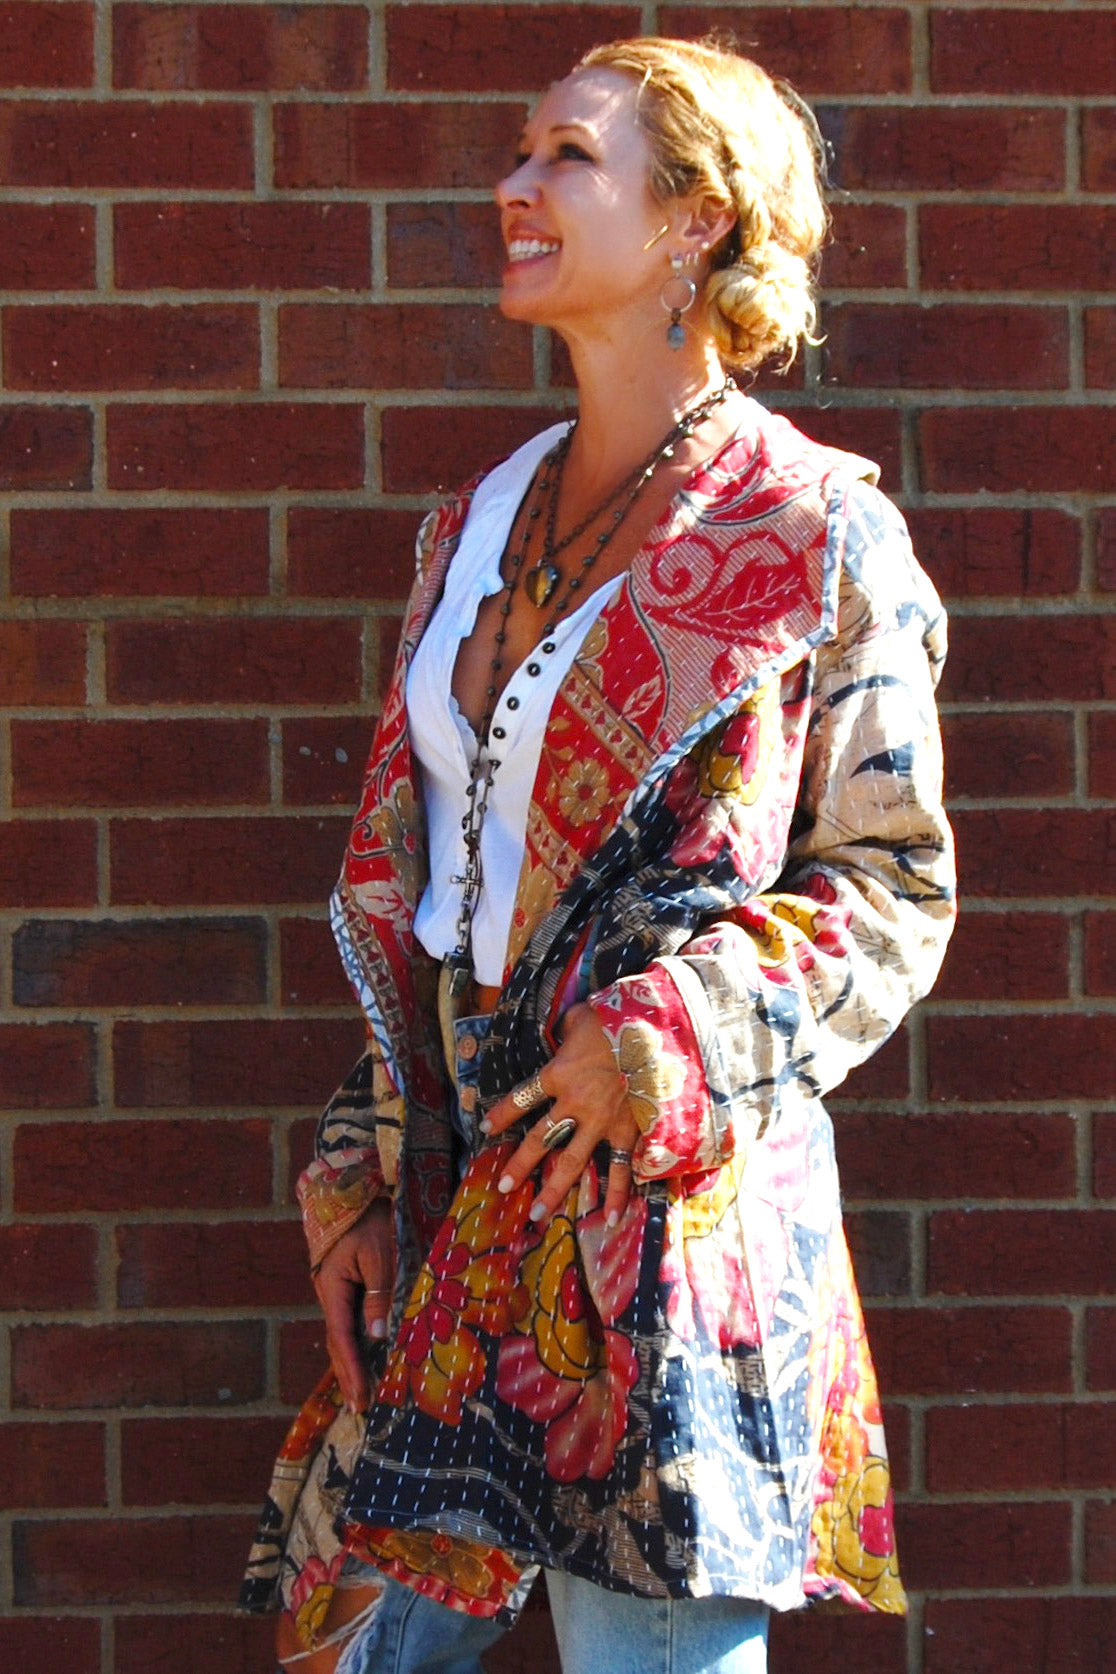 Load image into Gallery viewer, The Dahlia Patchwork Jacket in Corduroy - SpiritedBoutiques Boho Hippie Boutique Style Jacket, The Roots
